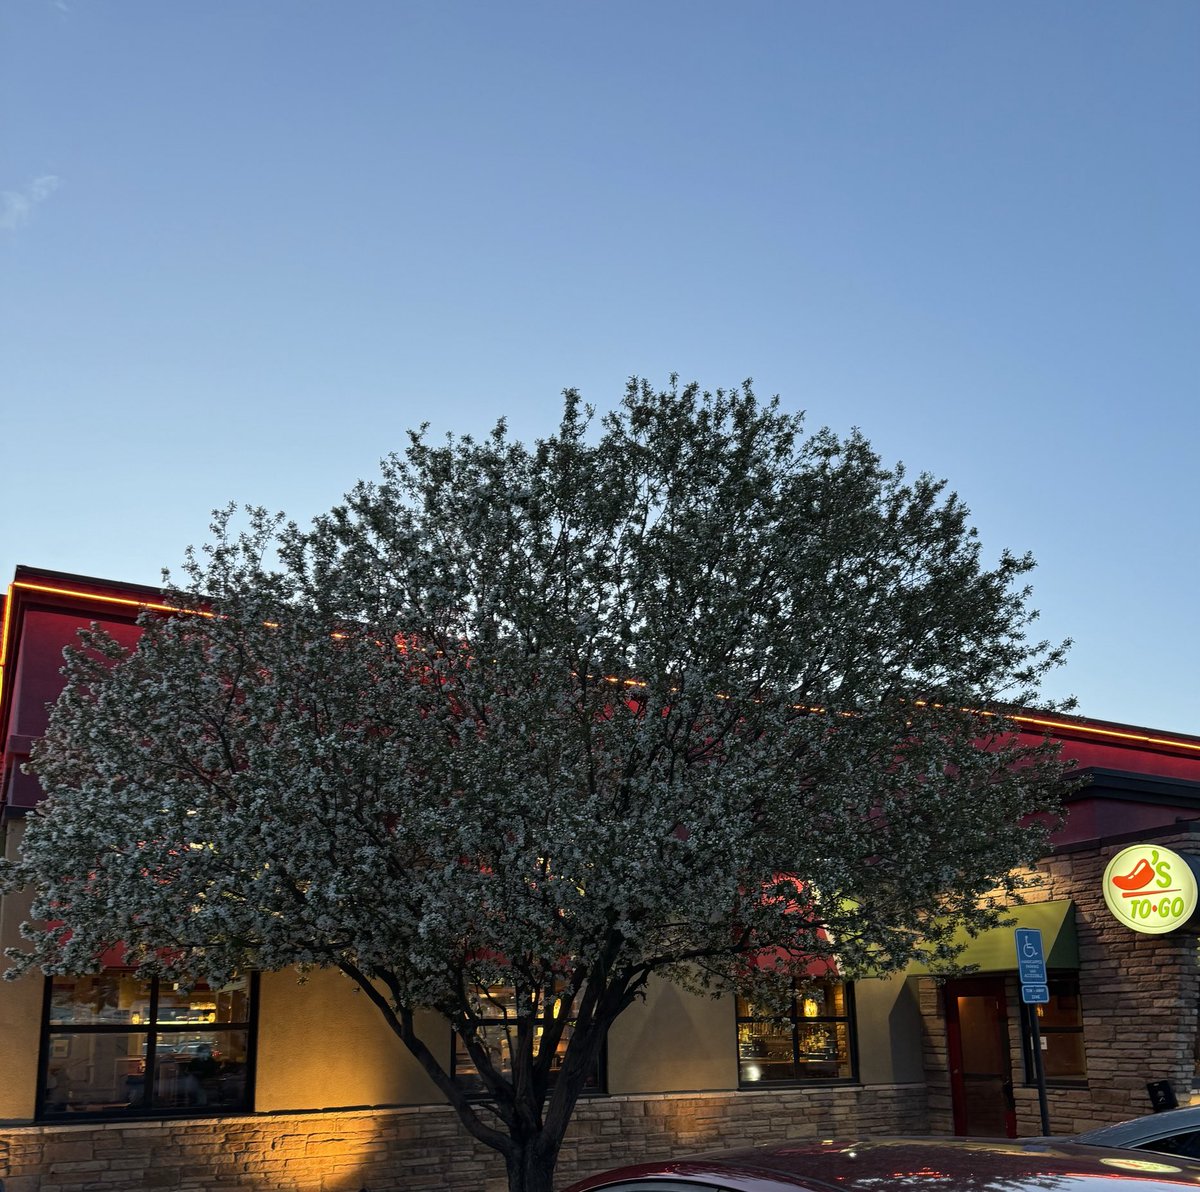 I truly love this tree in front of my To Go door. It just adds color to this area. #Chilislove #ChilisTowerRd #springincolorado #mountainregion